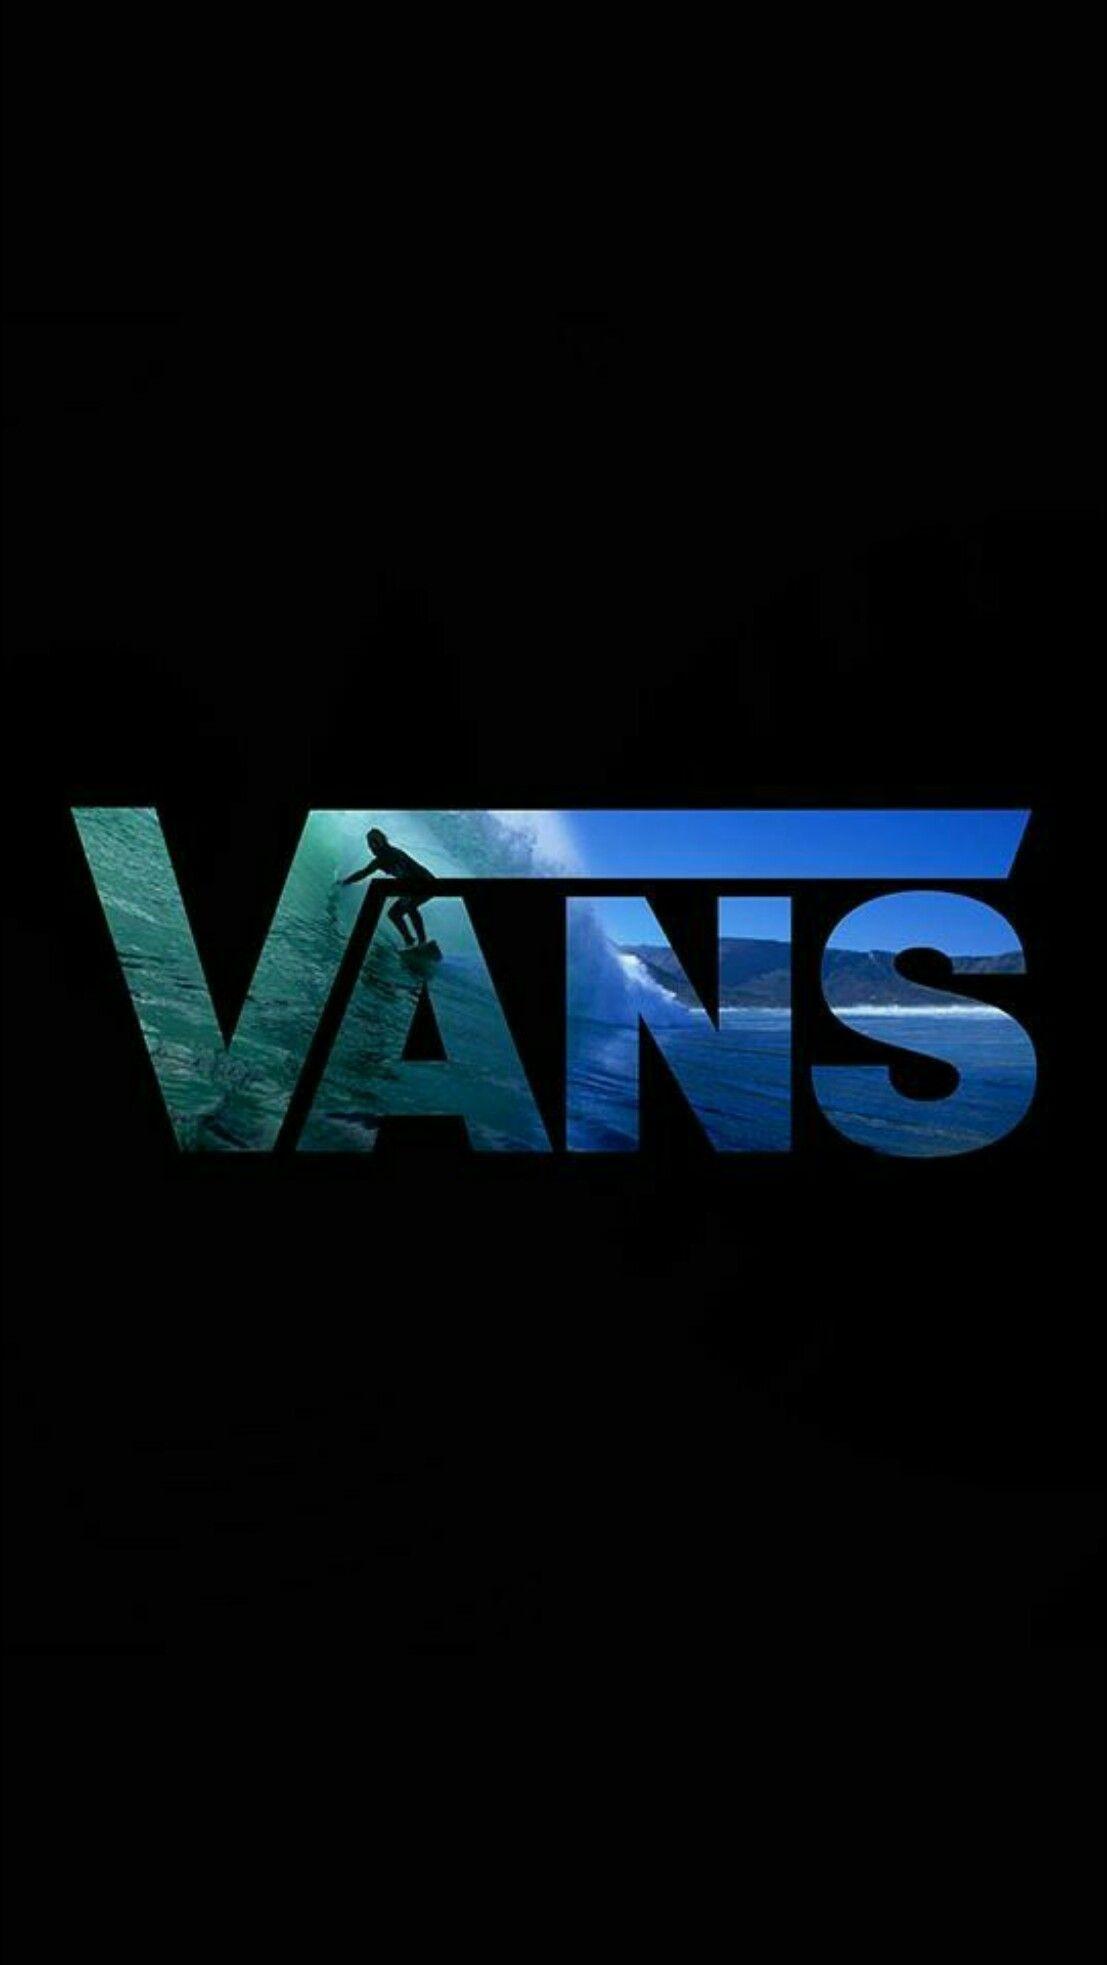 Vans Wallpaper For Android